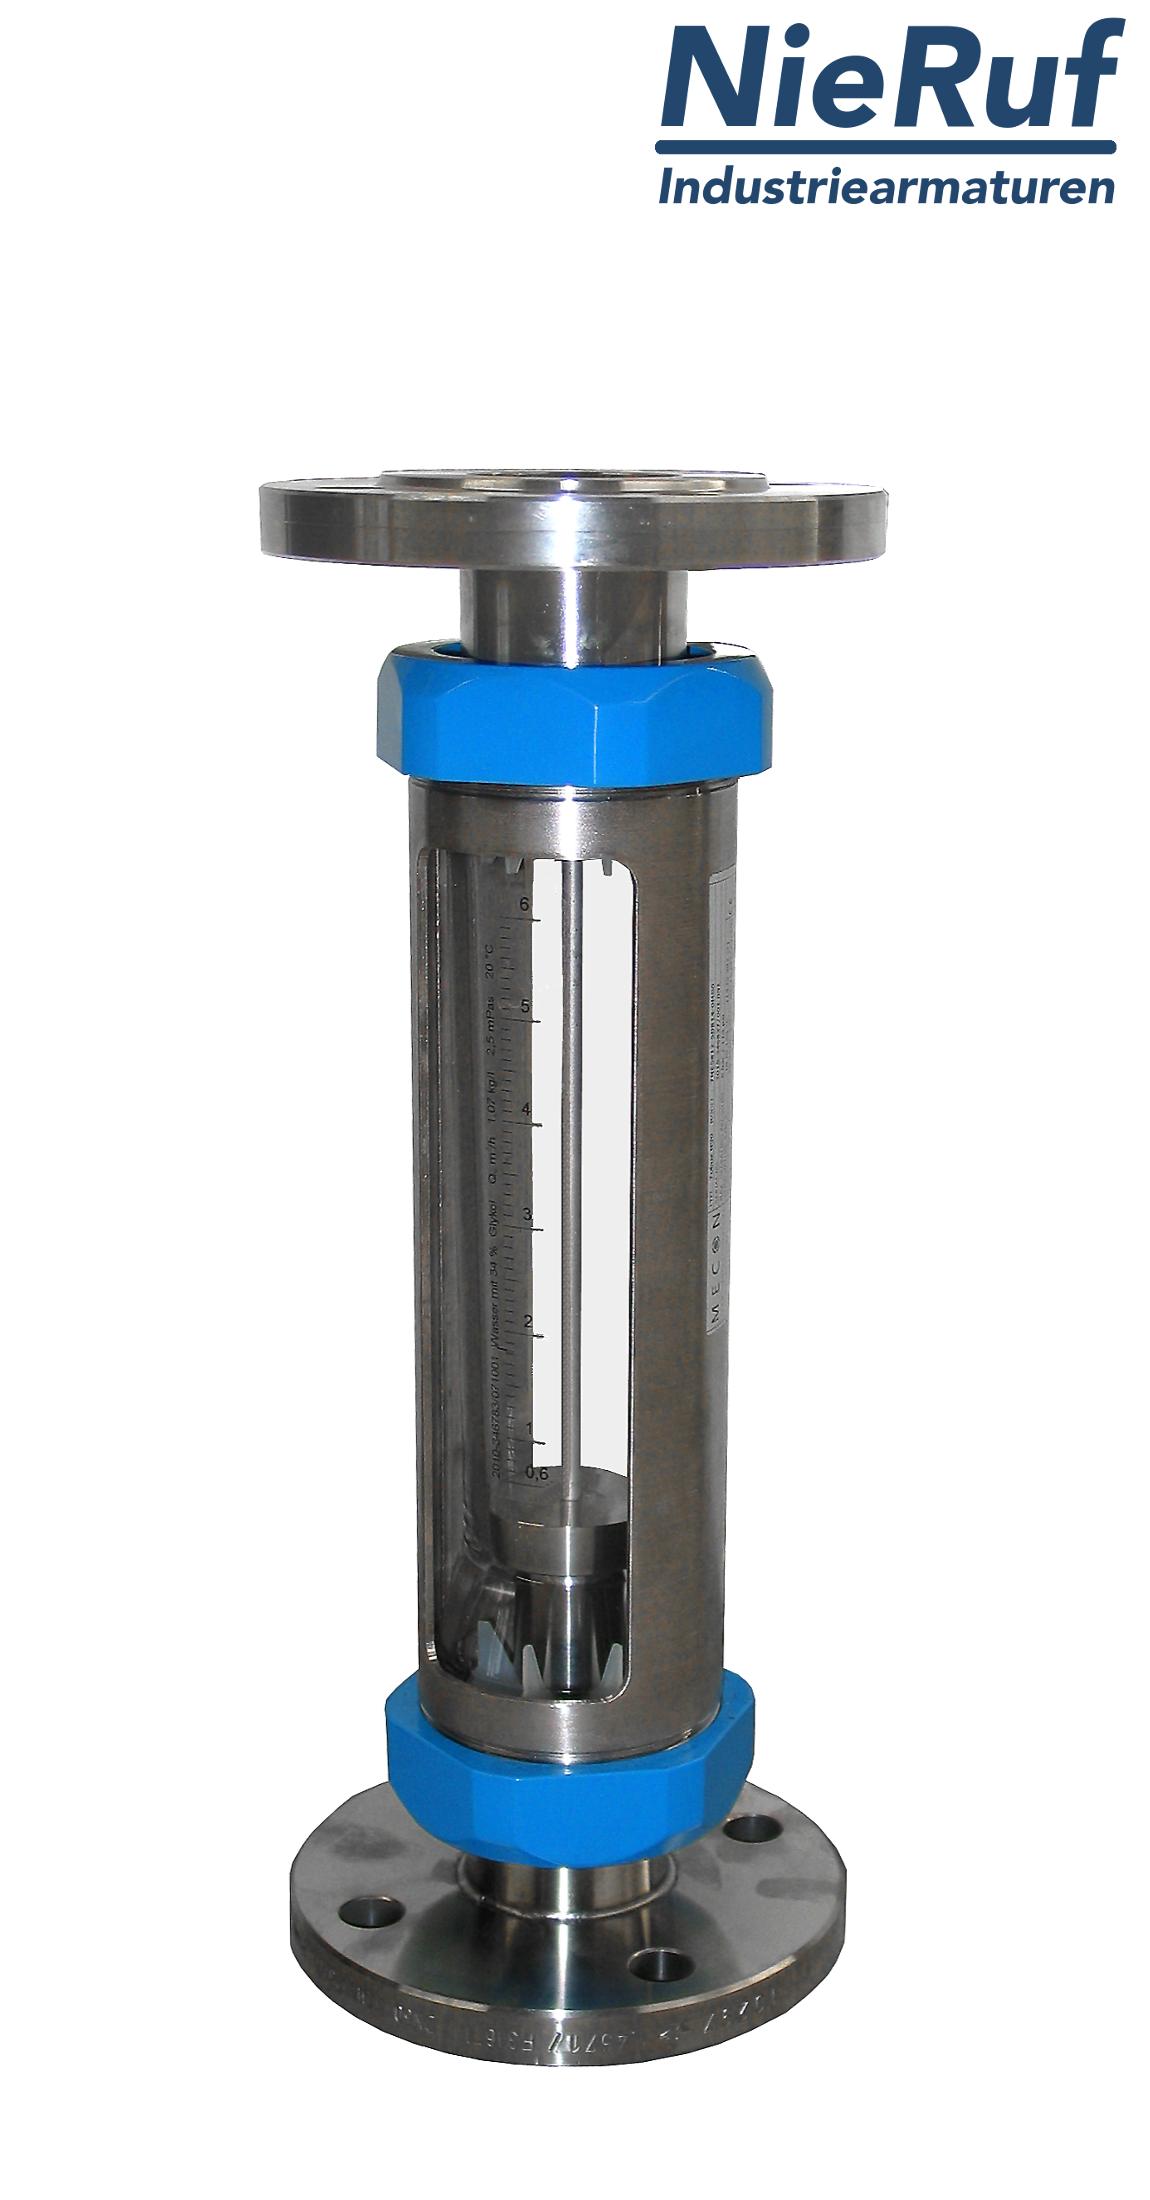 Variable area flowmeter stainless steel + borosilicate flange DN65 2000.0 - 12500 l/h water FKM